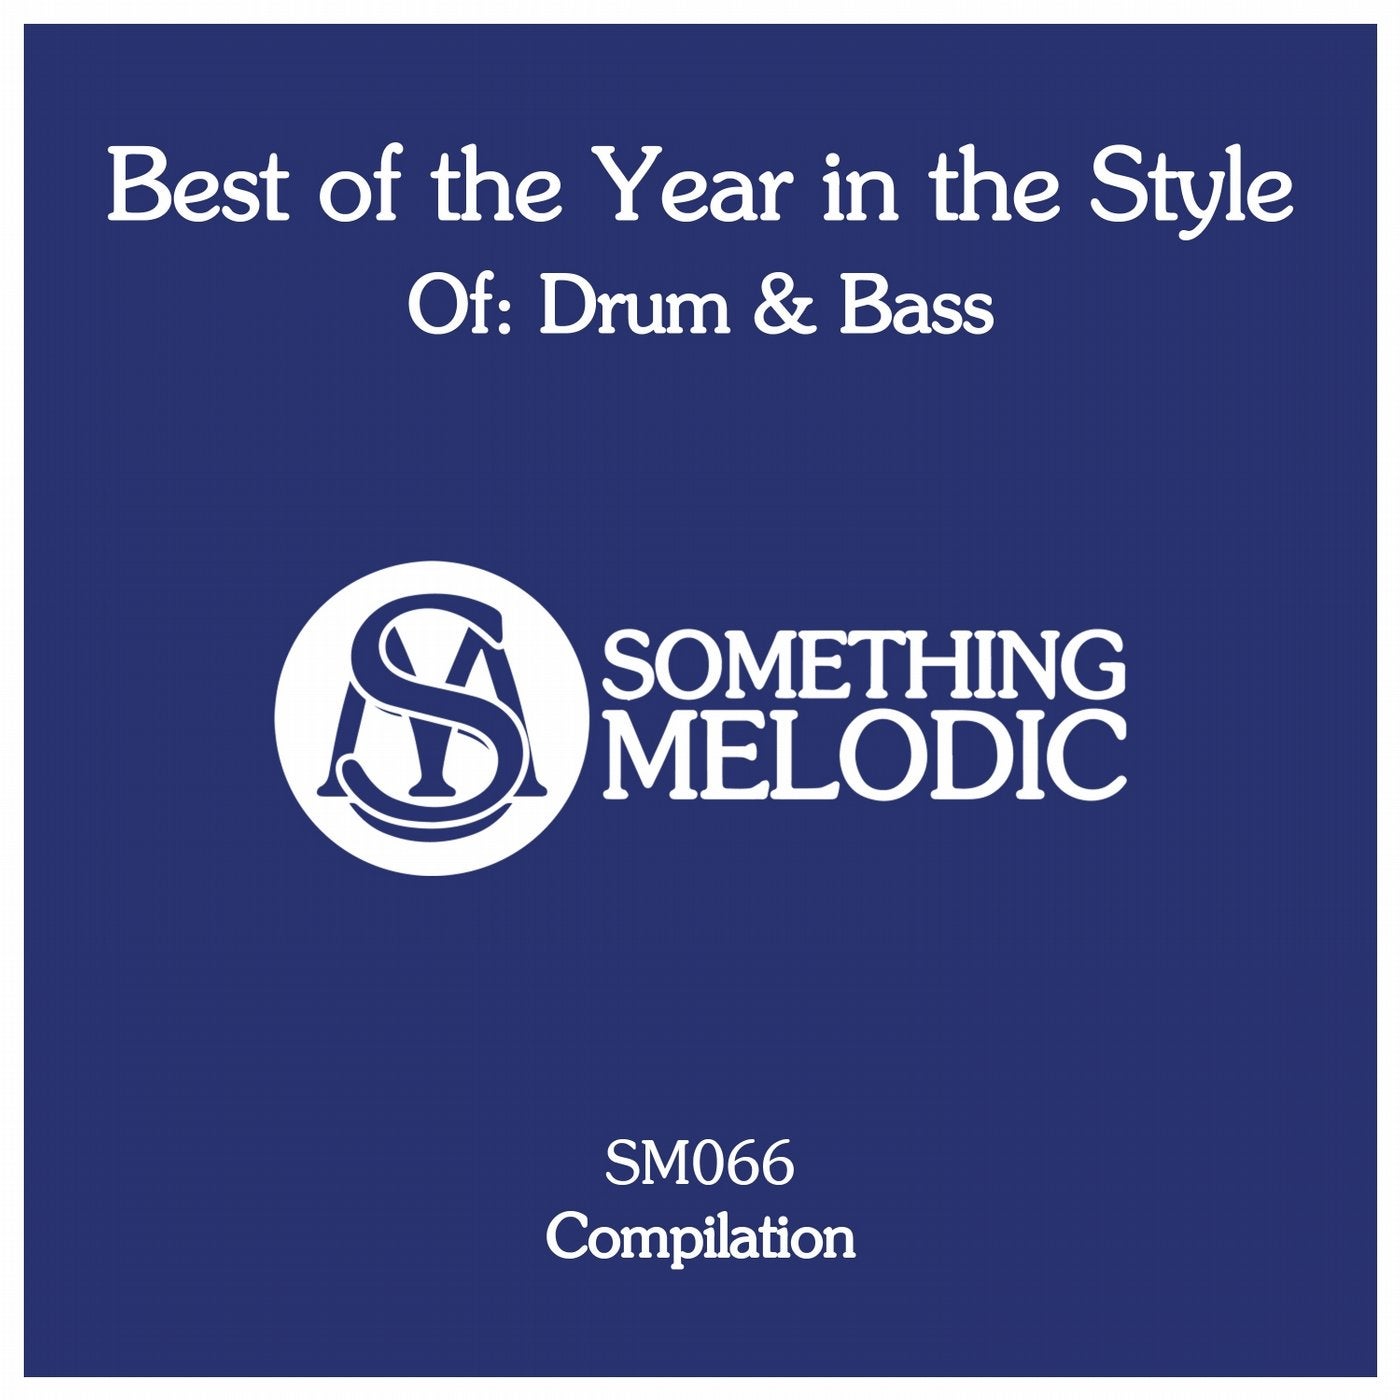 Best of the Year in the Style Of: Drum & Bass